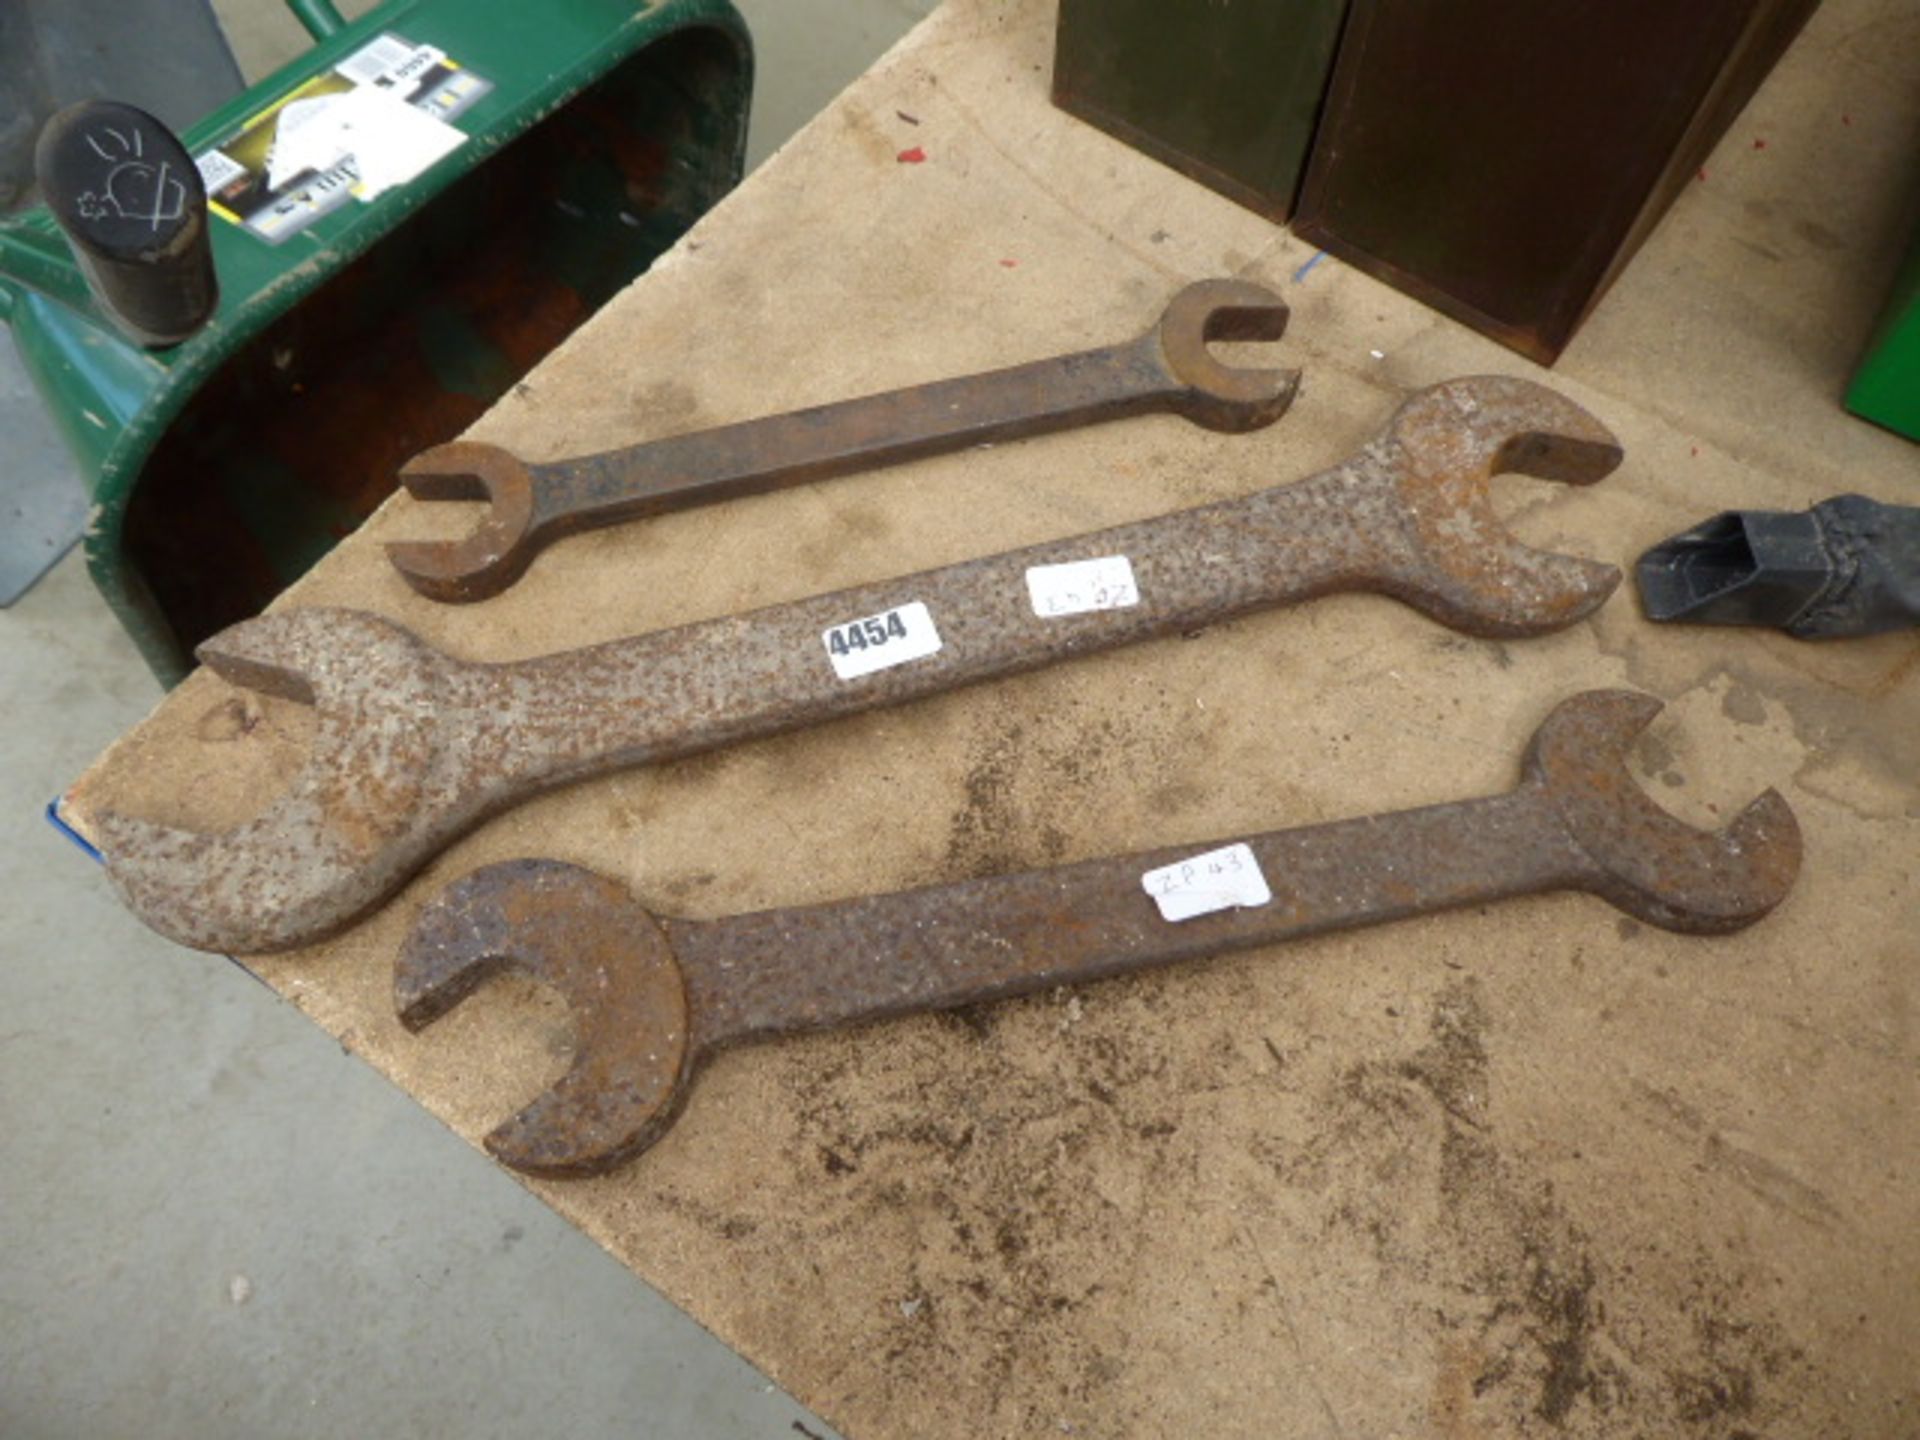 3 large spanners